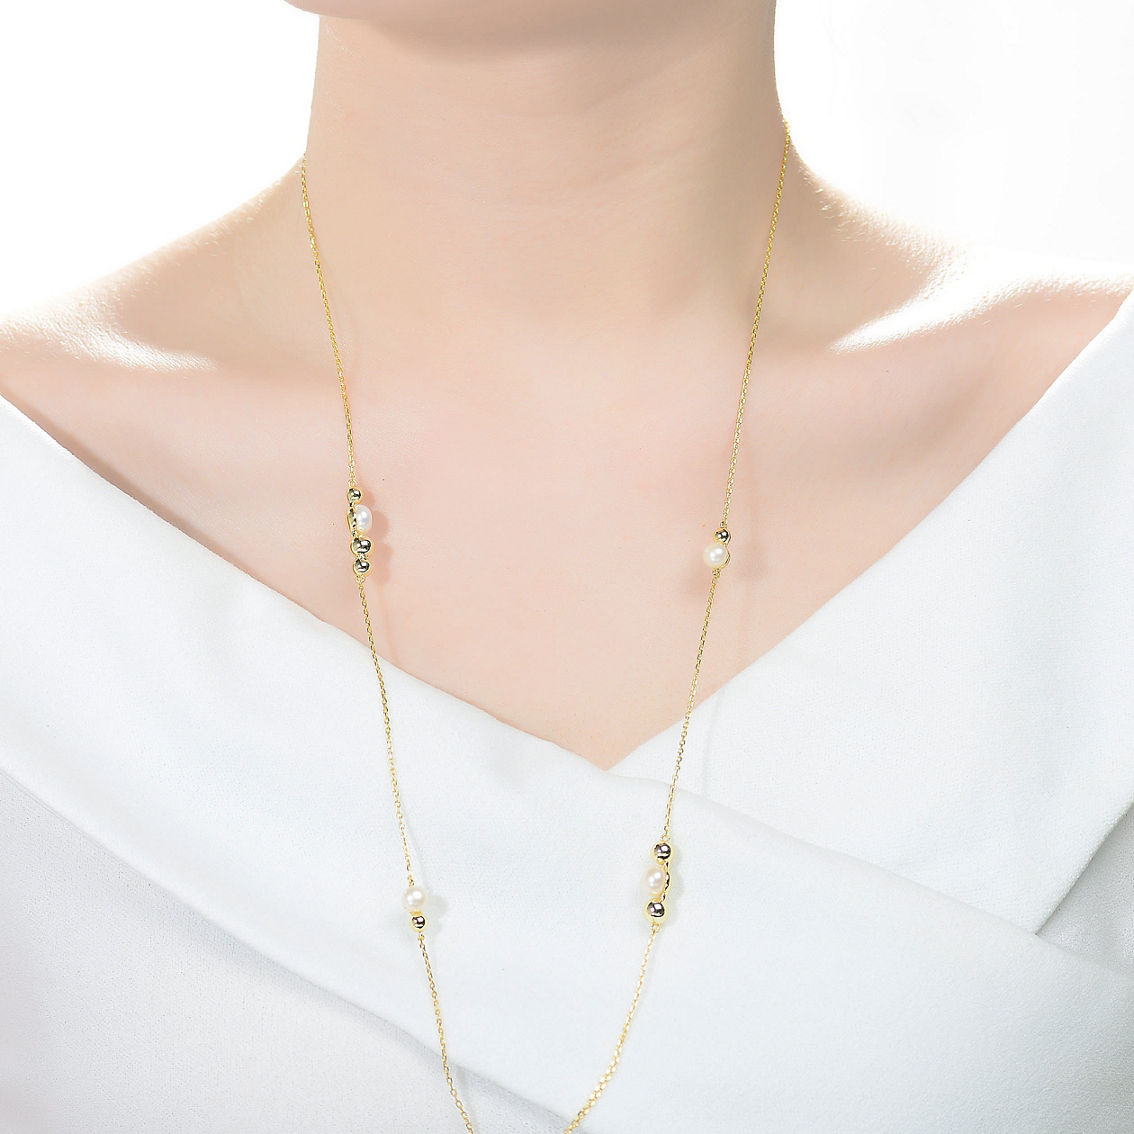 Gold Plating and Genuine Freshwater Pearl Station Necklace - Image 3 of 3